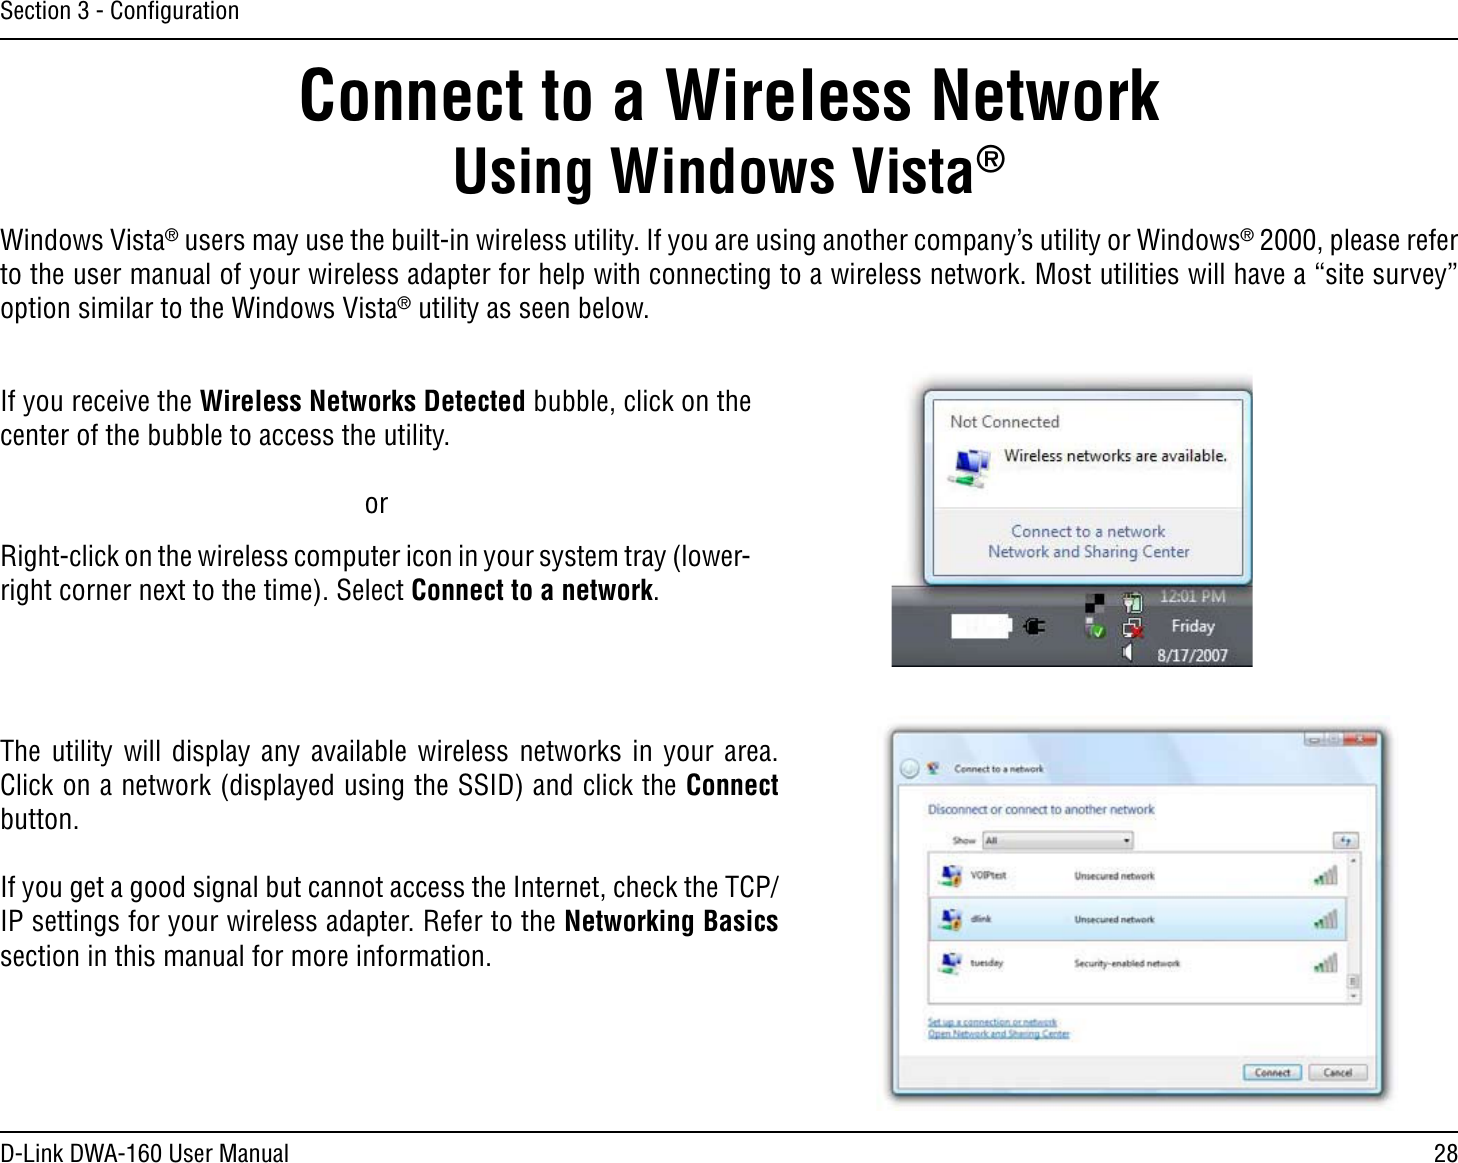 28D-Link DWA-160 User ManualSection 3 - ConﬁgurationConnect to a Wireless NetworkUsing Windows Vista® Windows Vista®USERSMAYUSETHEBUILTINWIRELESSUTILITY)FYOUAREUSINGANOTHERCOMPANYSUTILITYOR7INDOWS® 2000, please refer to the user manual of your wireless adapter for help with connecting to a wireless network. Most utilities will have a “site survey” option similar to the Windows Vista® utility as seen below.Right-click on the wireless computer icon in your system tray (lower-right corner next to the time). Select Connect to a network.If you receive the Wireless Networks Detected bubble, click on the center of the bubble to access the utility.     orThe utility will display any available wireless networks in your area. Click on a network (displayed using the SSID) and click the Connect button.If you get a good signal but cannot access the Internet, check the TCP/IP settings for your wireless adapter. Refer to the Networking Basics section in this manual for more information.